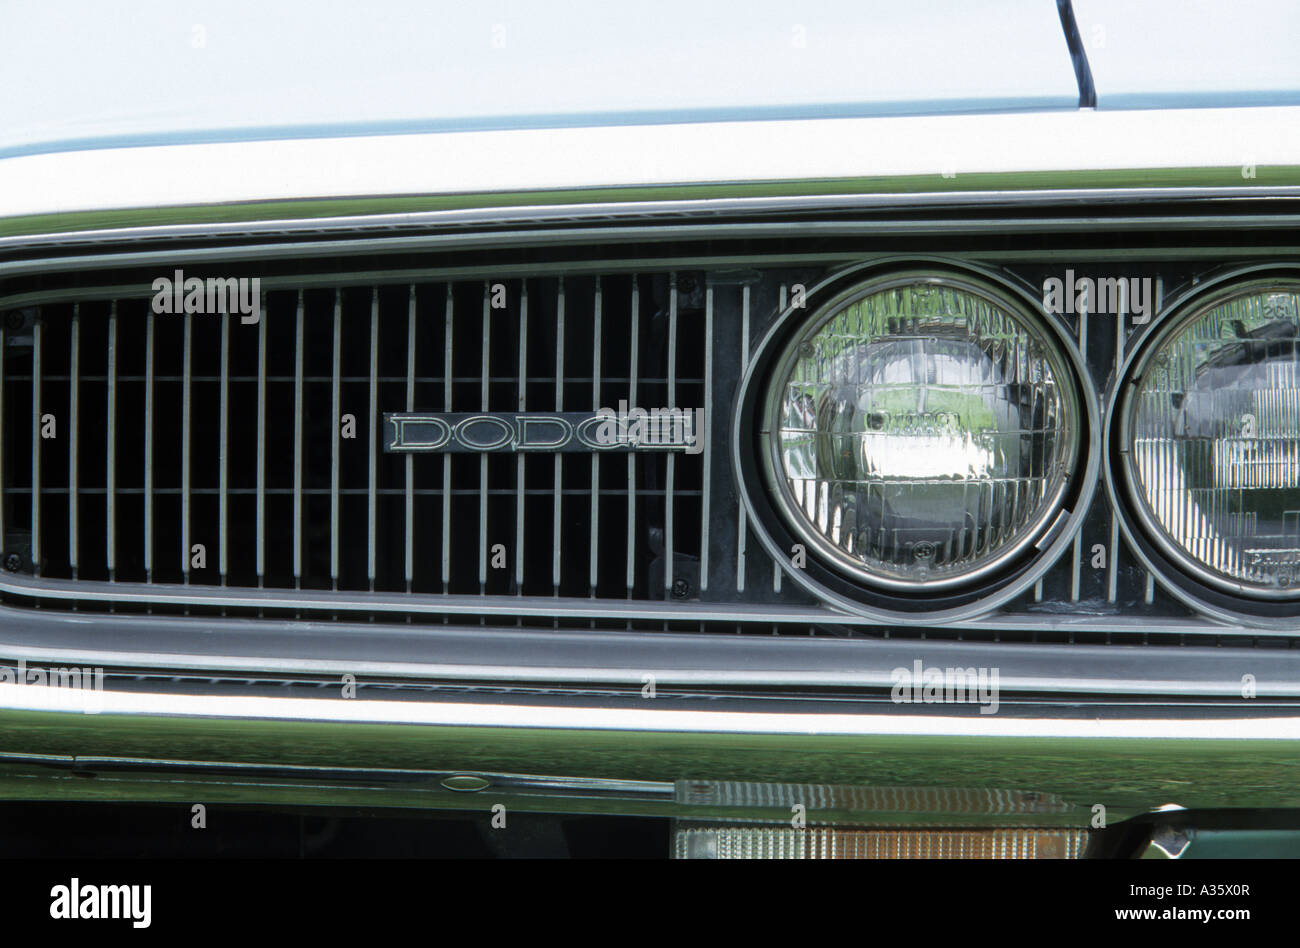 Dodge Coronet of 1970. American car manufacturer 1914 to date Stock Photo